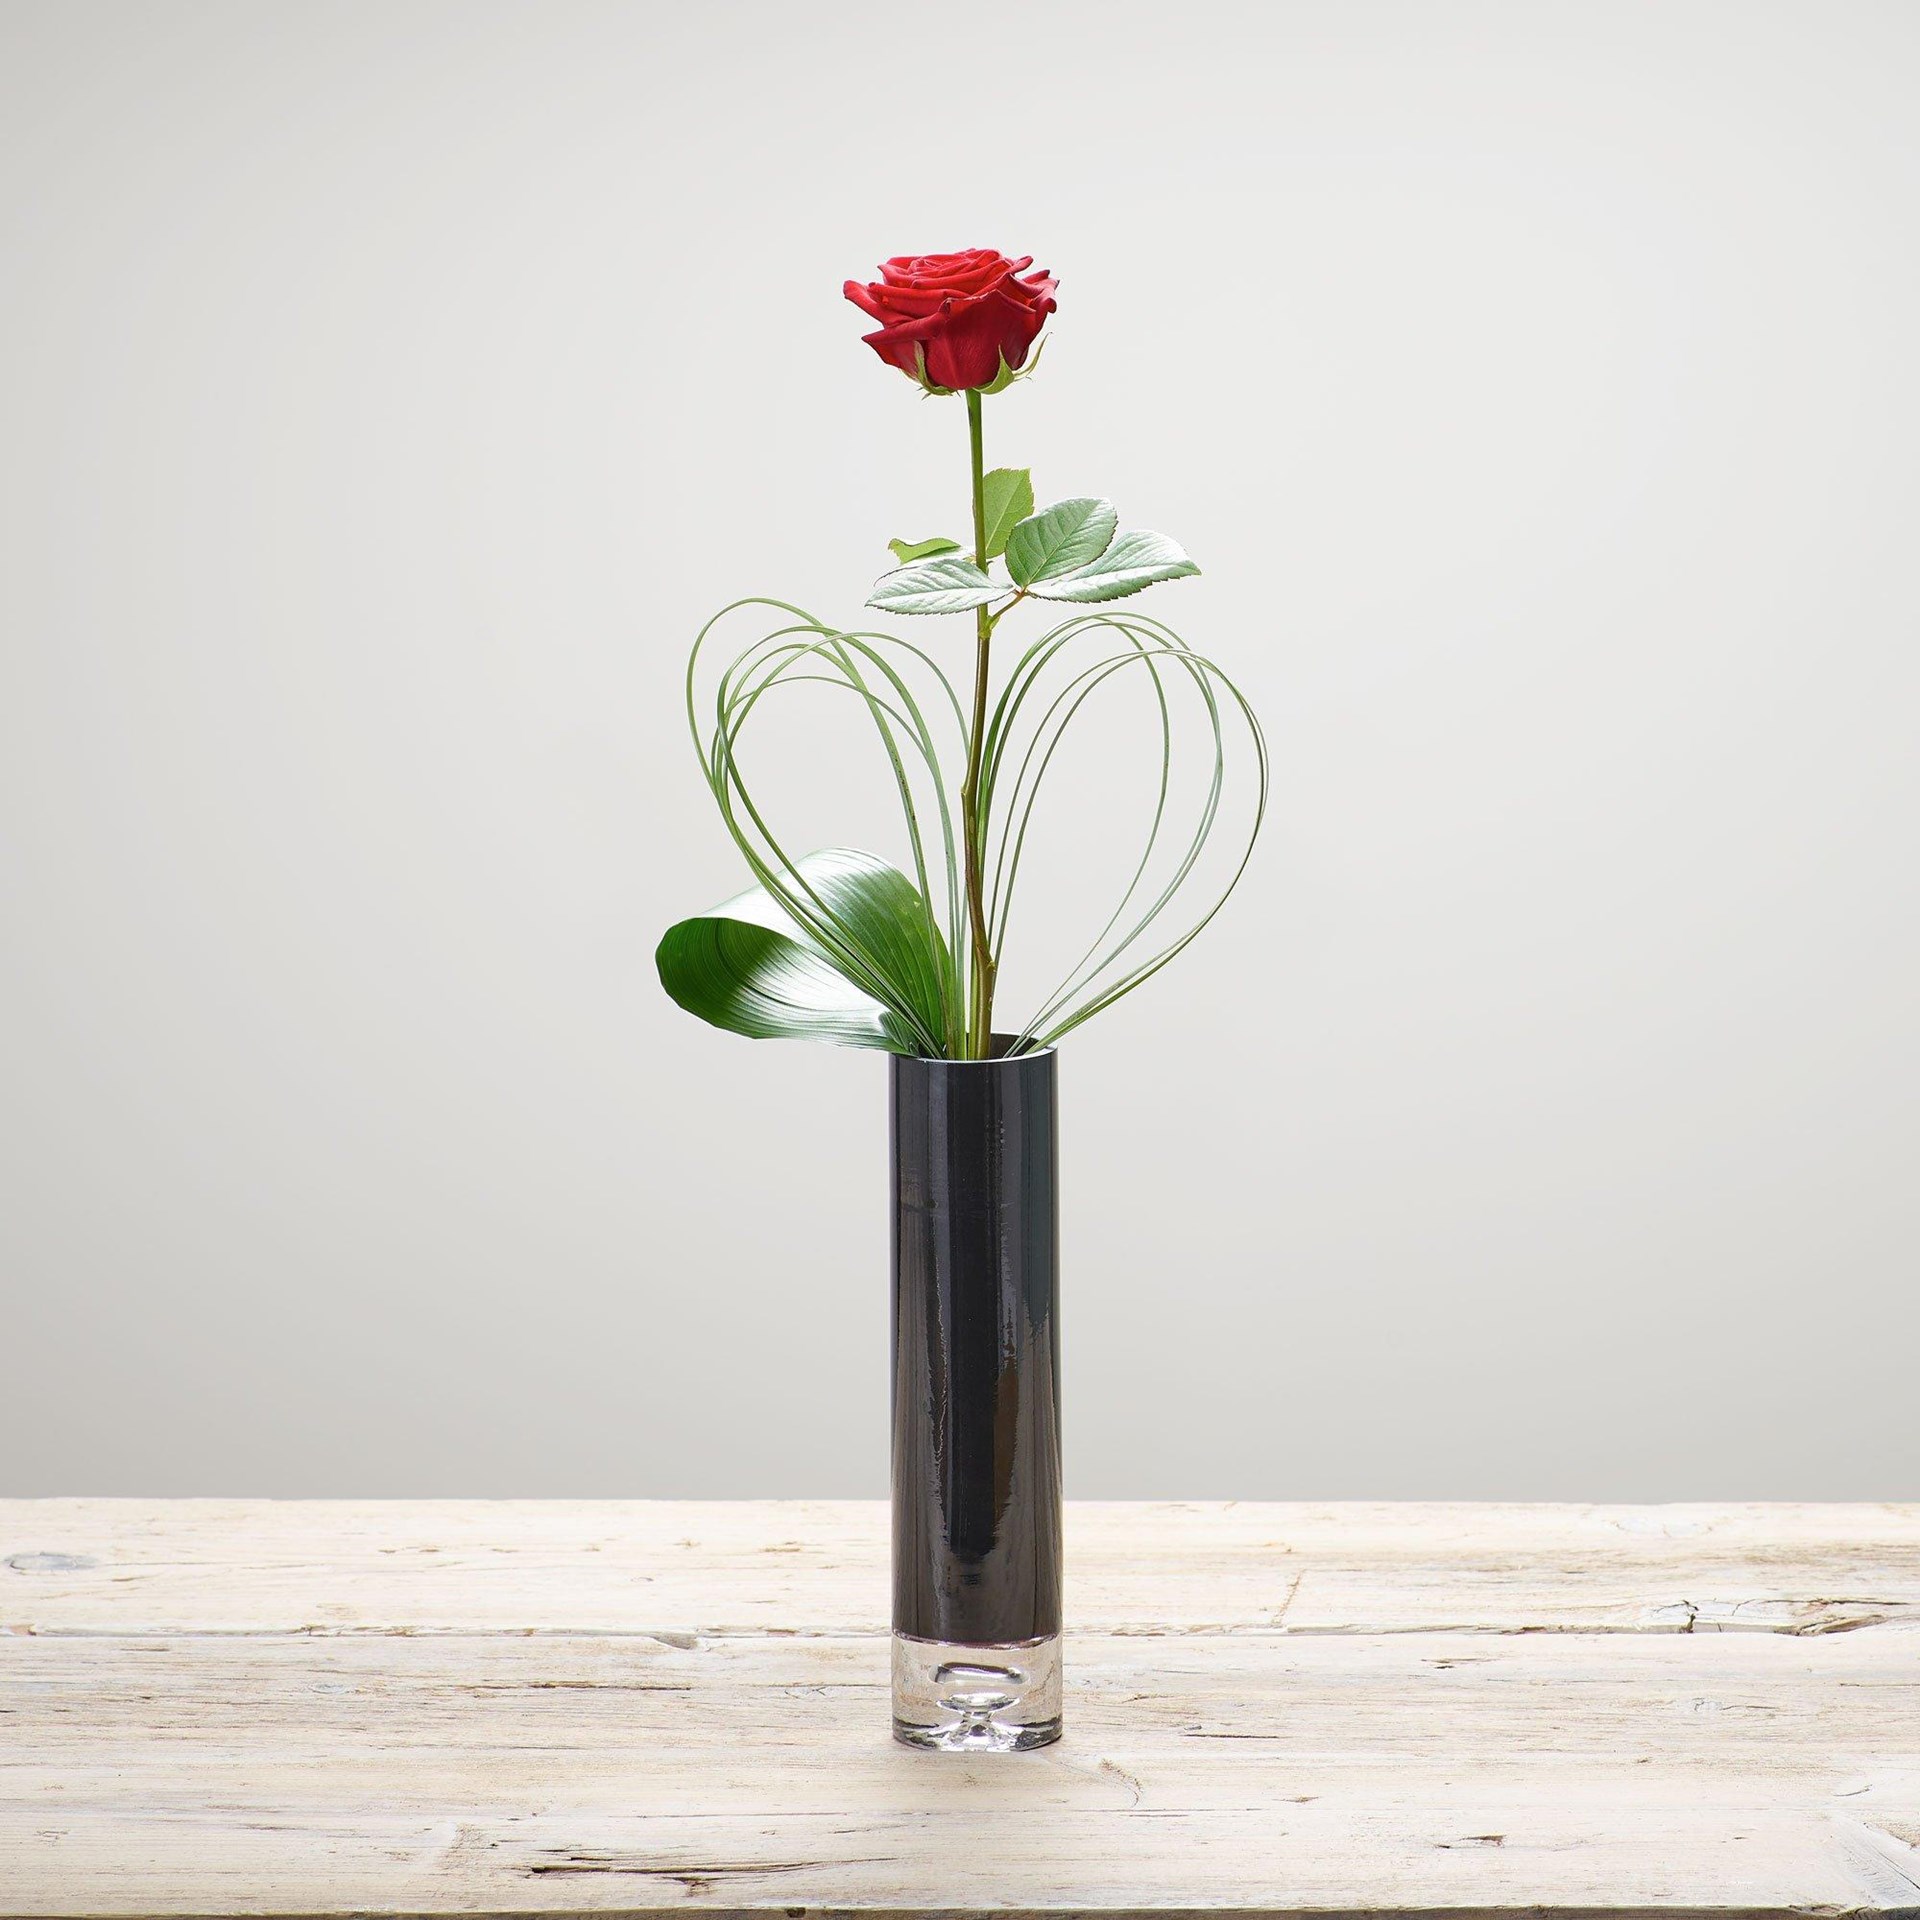 product image for Single Flower.